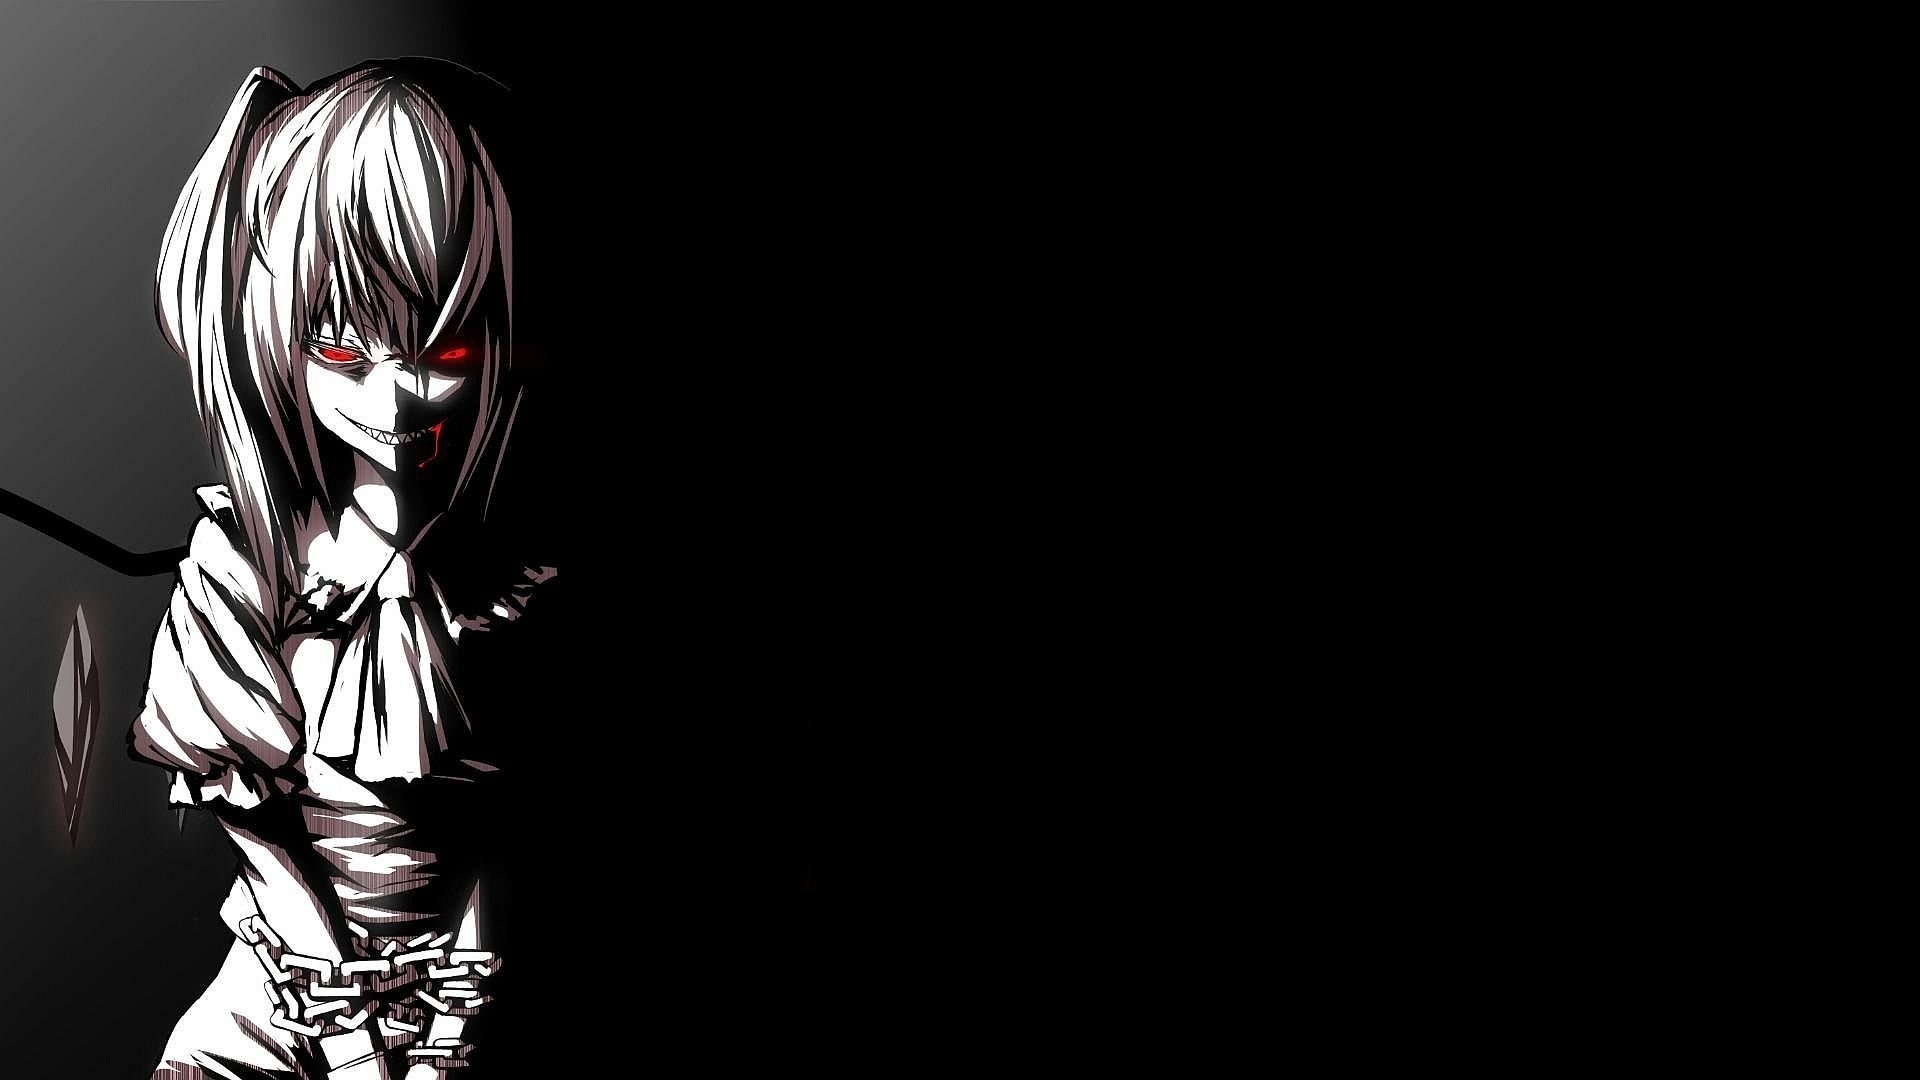 1920x1080 ... HD wallpapers Source Â· 86 Windows Anime Wallpapers on WallpaperPlay